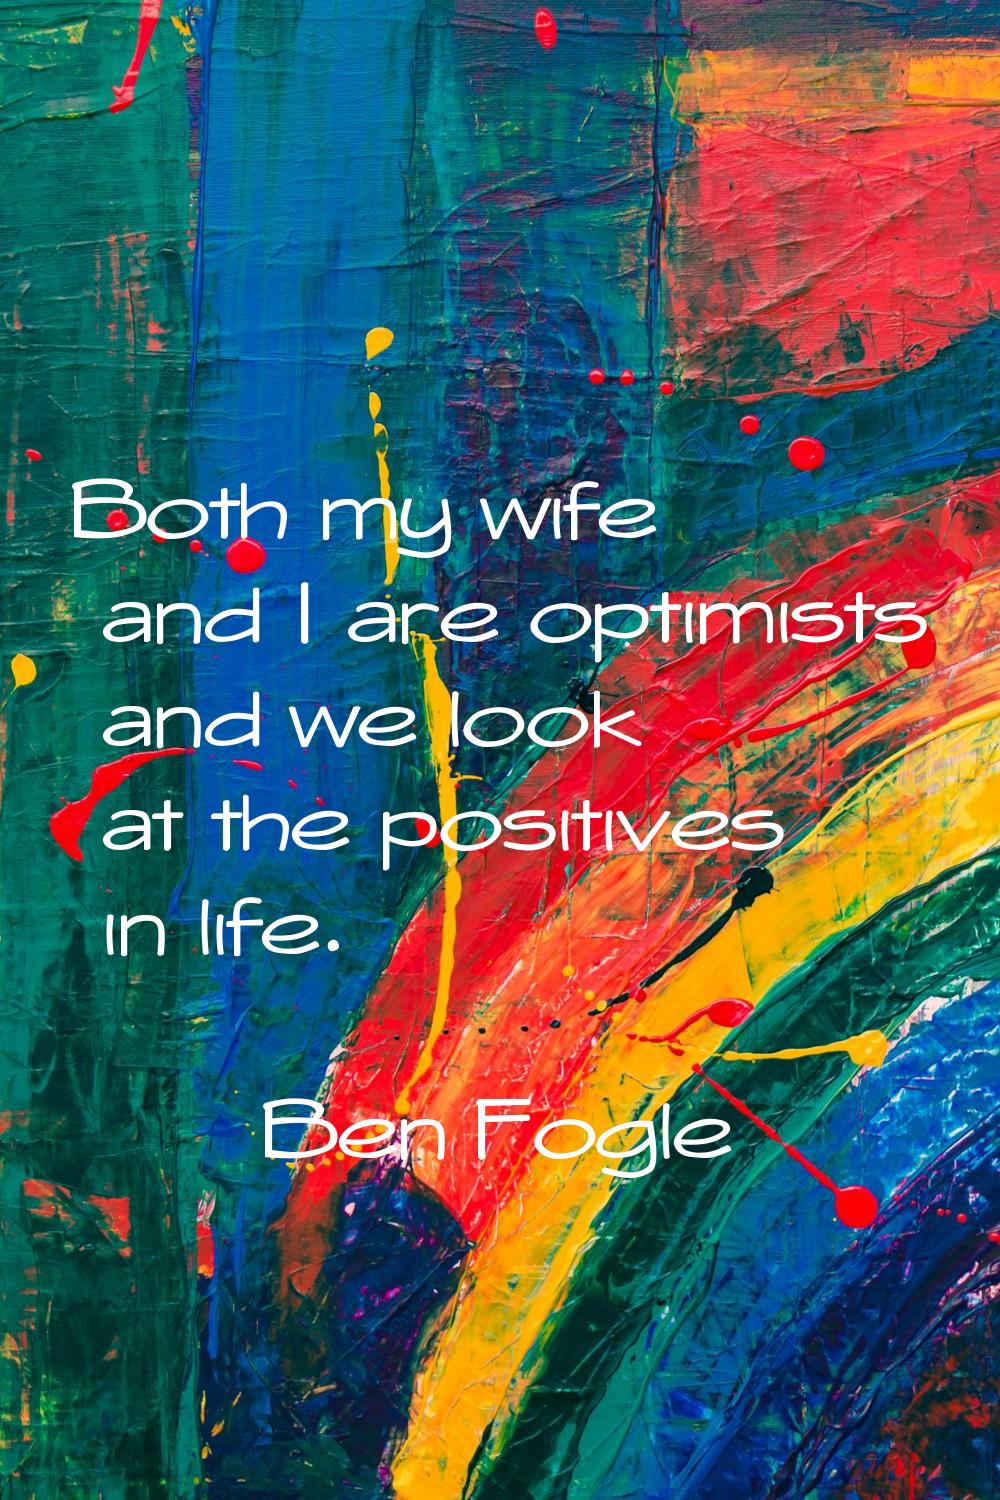 Both my wife and I are optimists and we look at the positives in life.